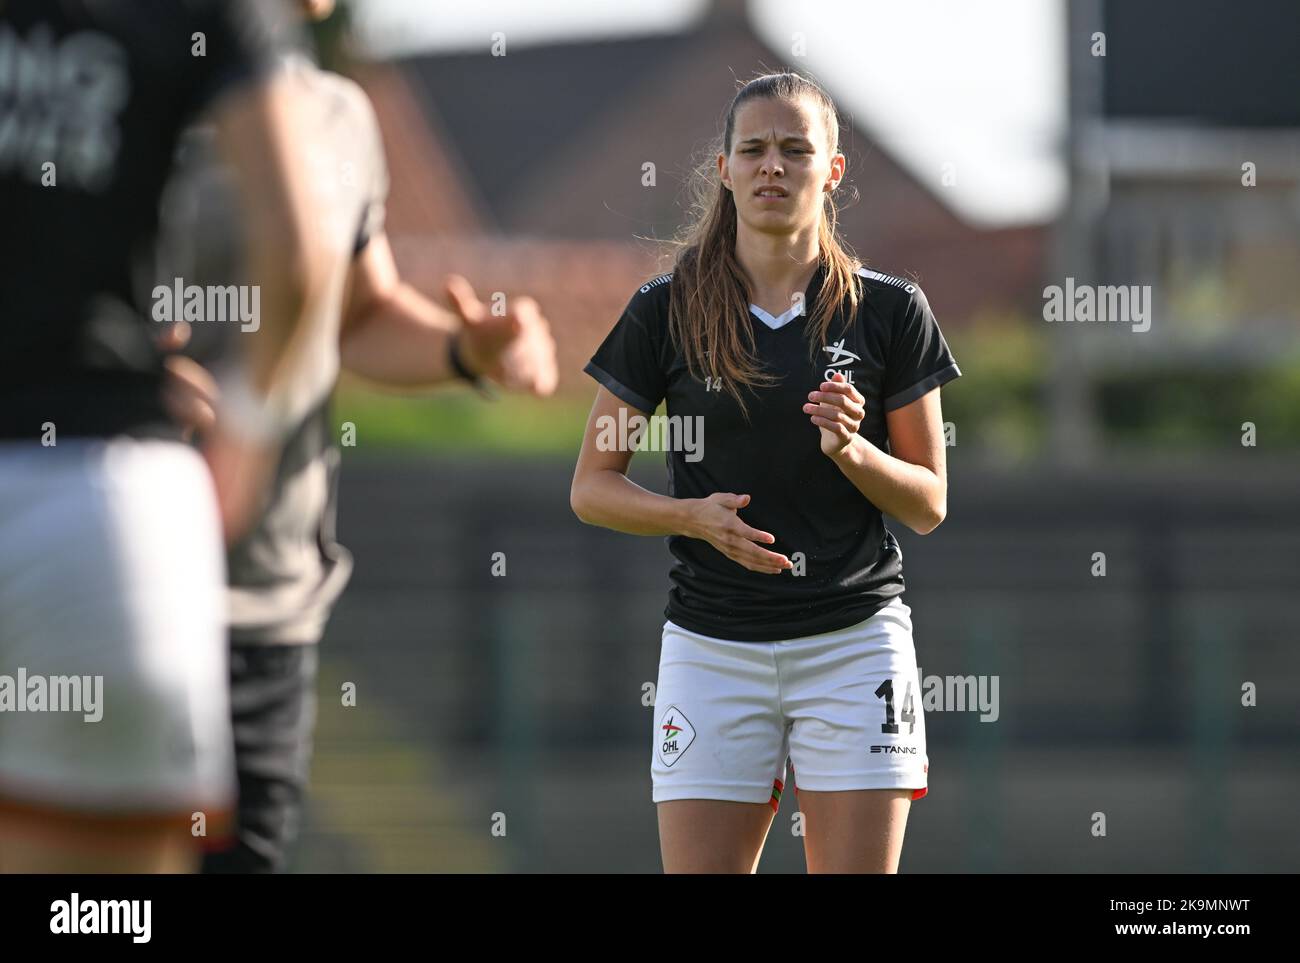 Shari Van Belle (14) of OHL pictured during a female soccer game between  Club Brugge Dames YLA and Oud Heverlee Leuven on the 9th matchday of the  2022 - 2023 season of